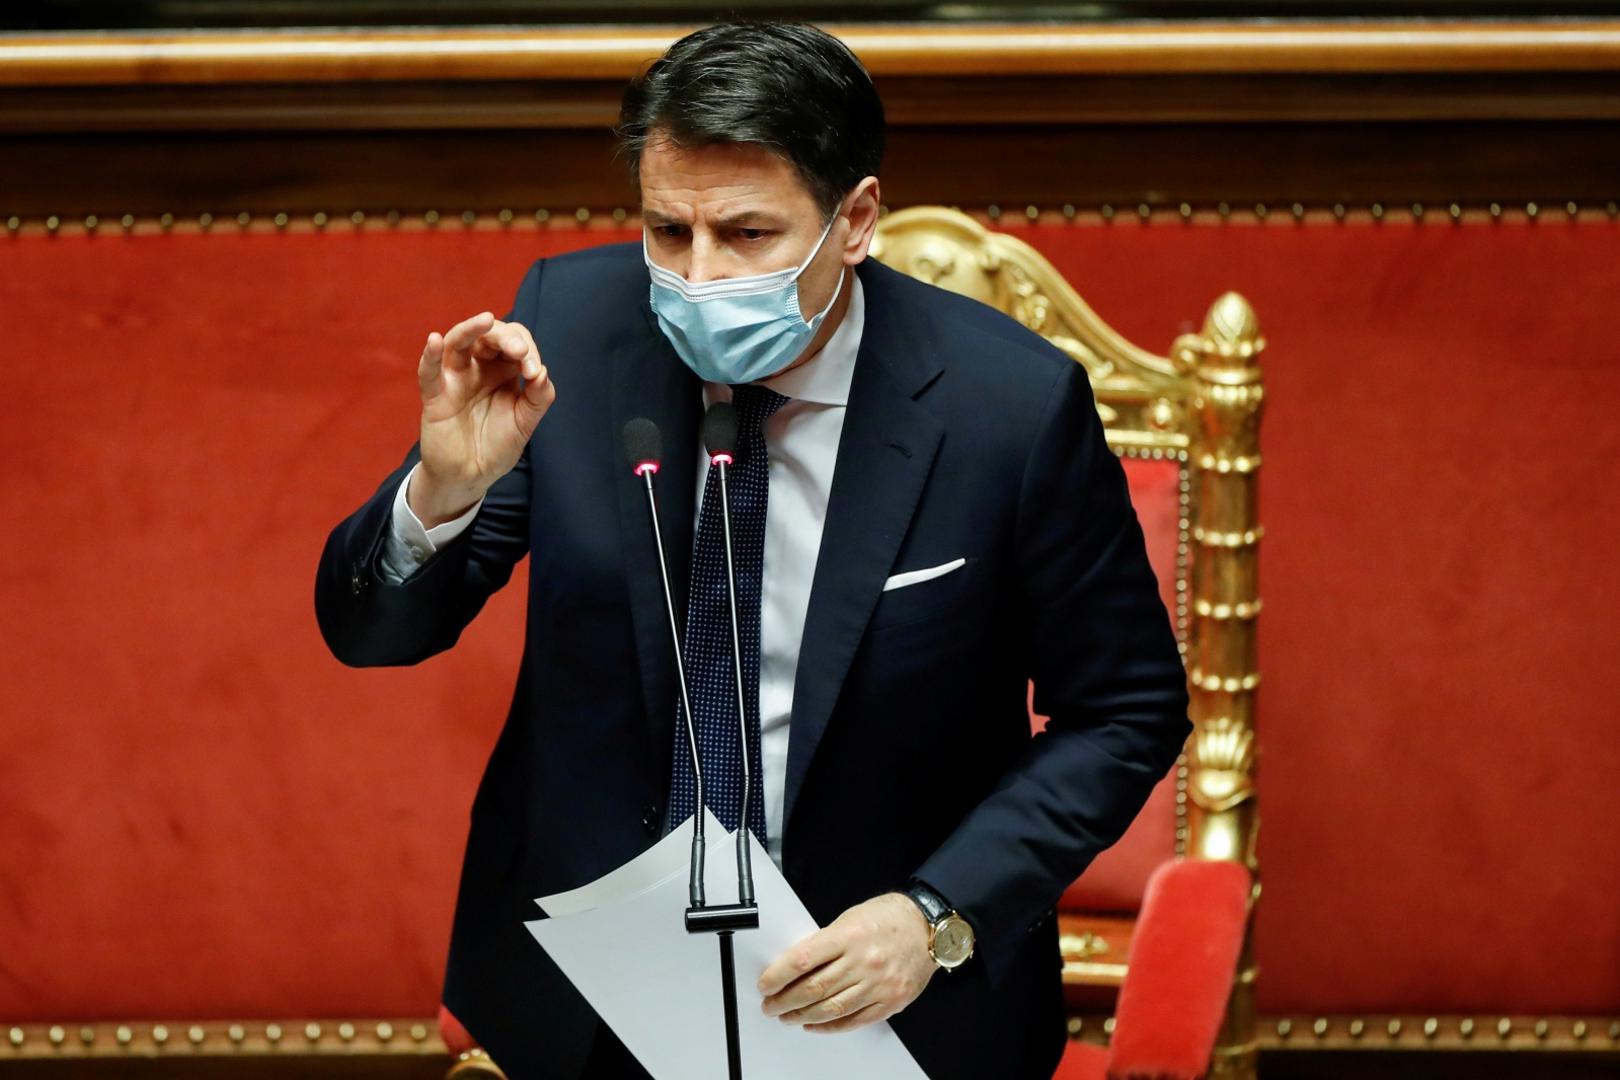 FILE PHOTO: Italian PM Conte faces a confidence vote at the upper house of parliament, in Rome FILE PHOTO: Italian Prime Minister Giuseppe Conte gestures as he speaks ahead of a confidence vote at the upper house of parliament after former Prime Minister Matteo Renzi pulled his party out of government, in Rome, Italy, January 19, 2021. REUTERS/Yara Nardi/File Photo YARA NARDI